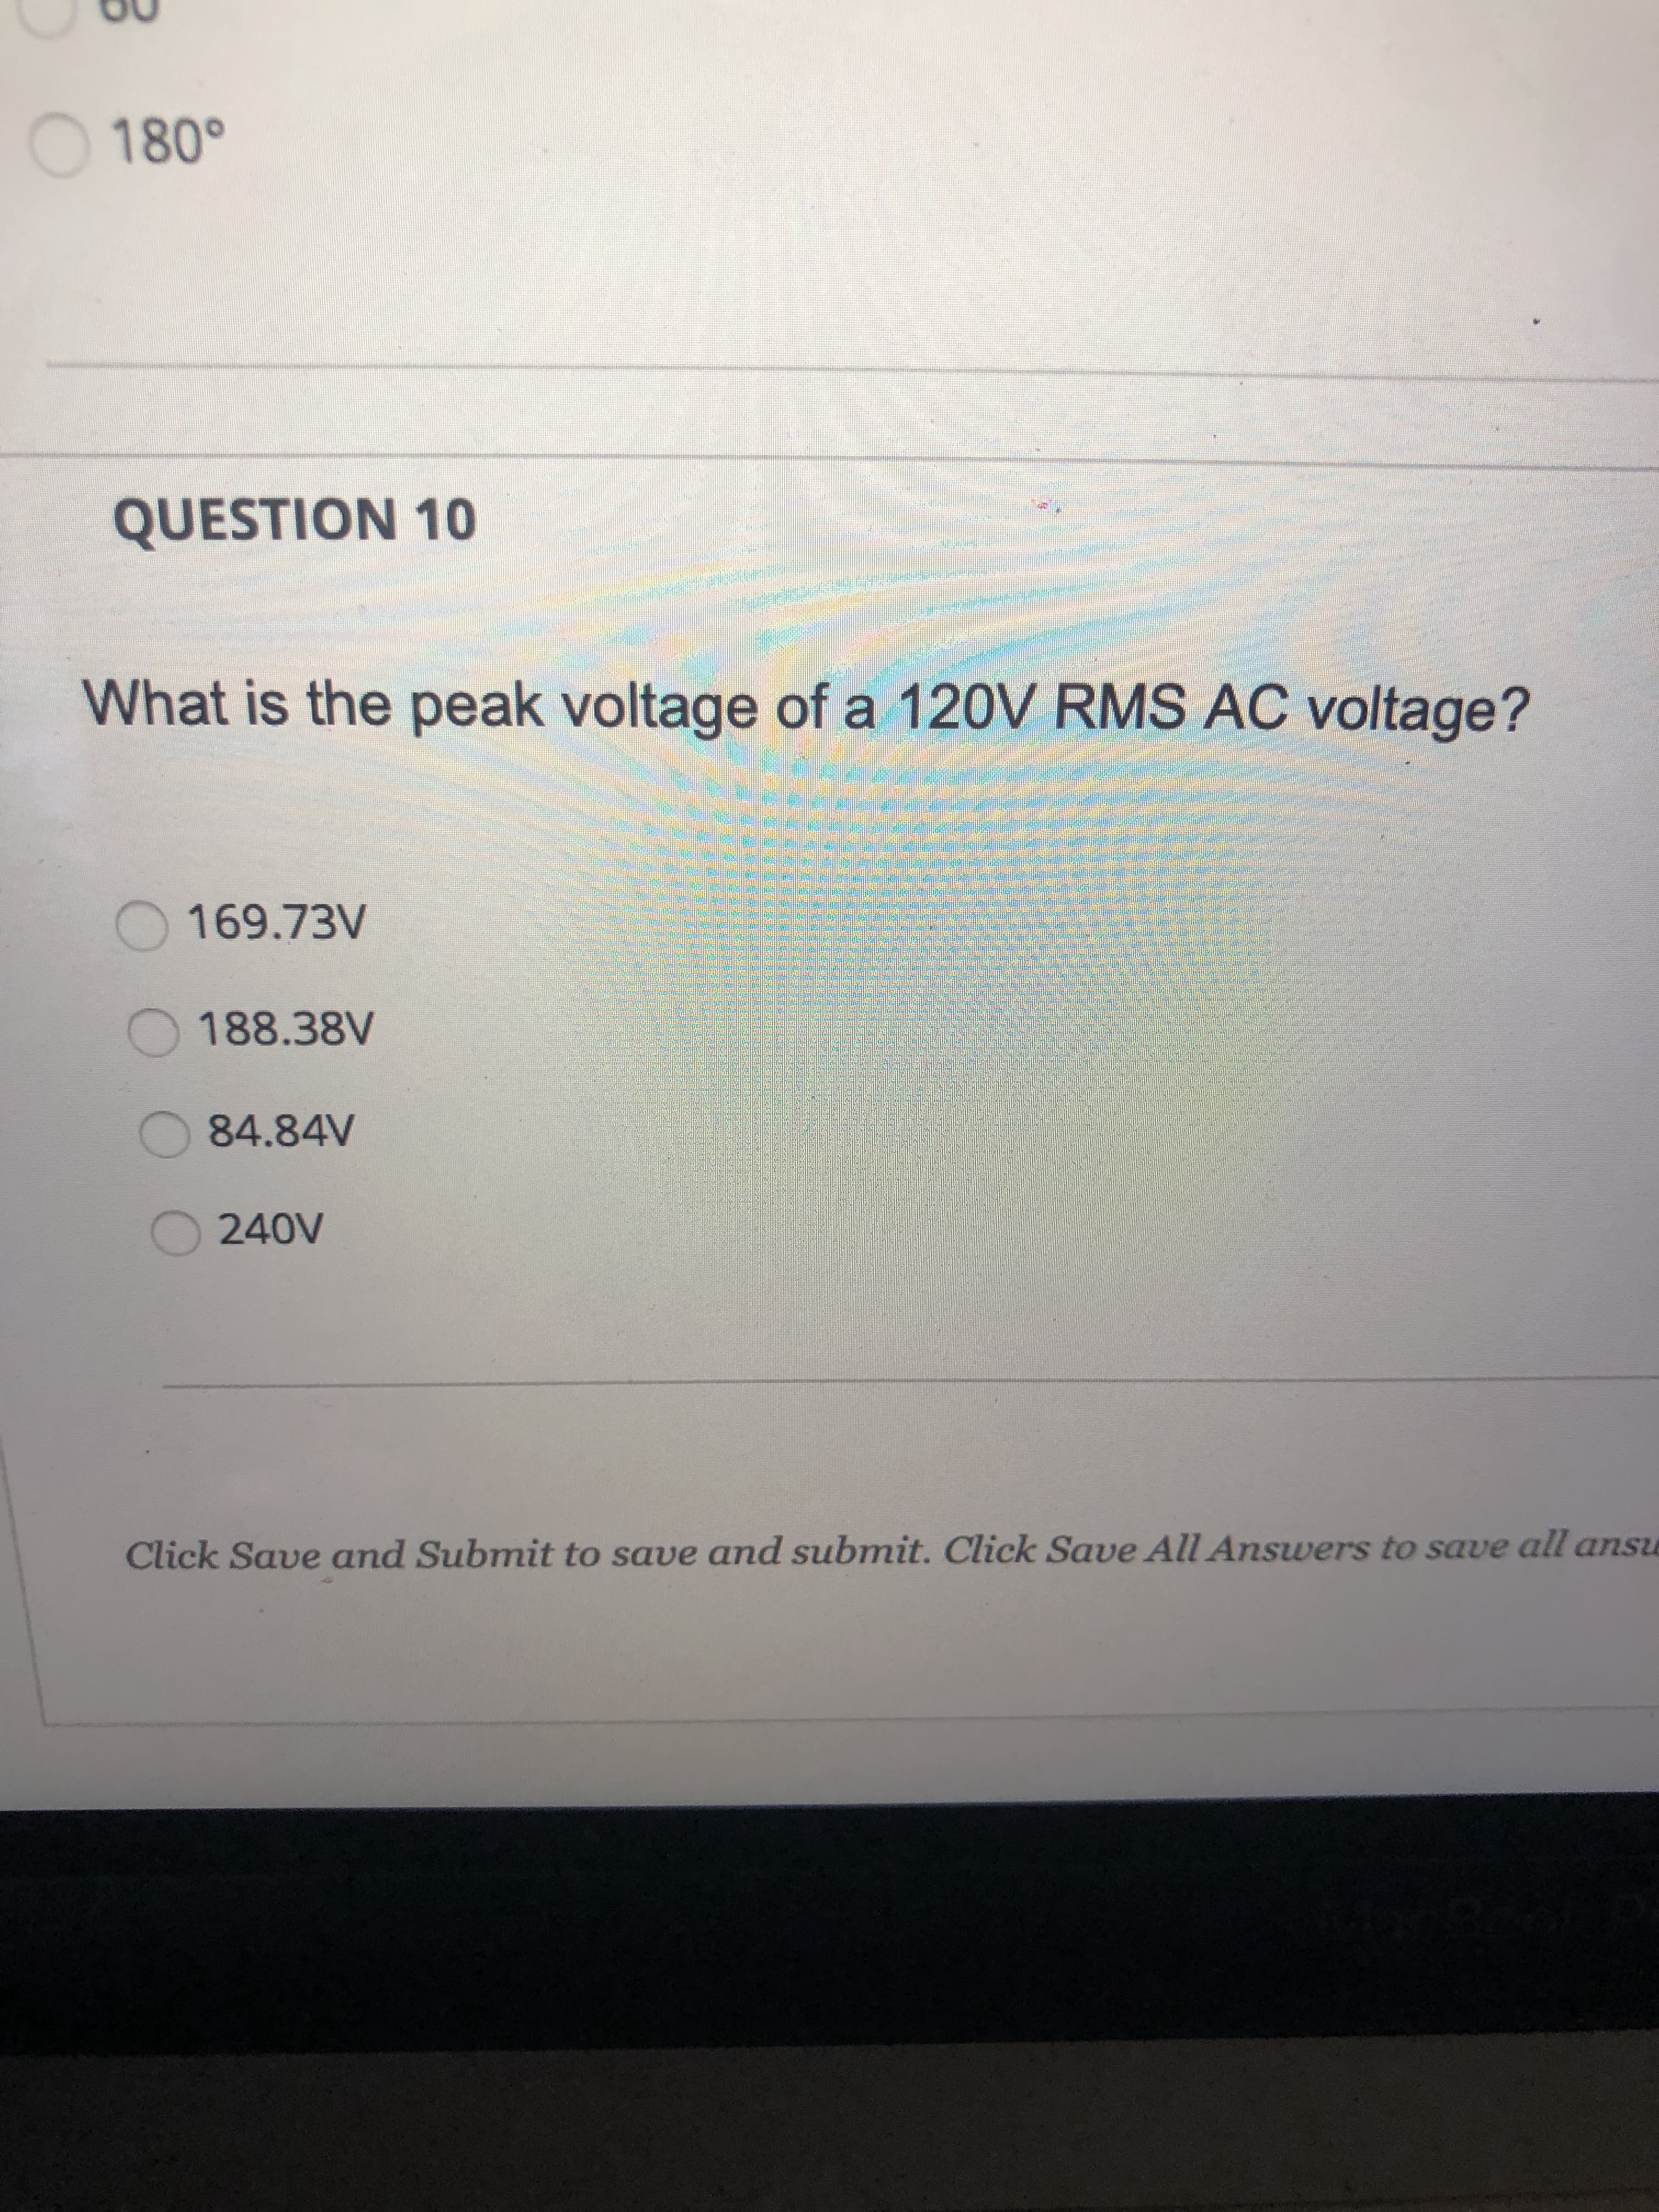 What is the peak voltage of a 120V RMS AC voltage?
